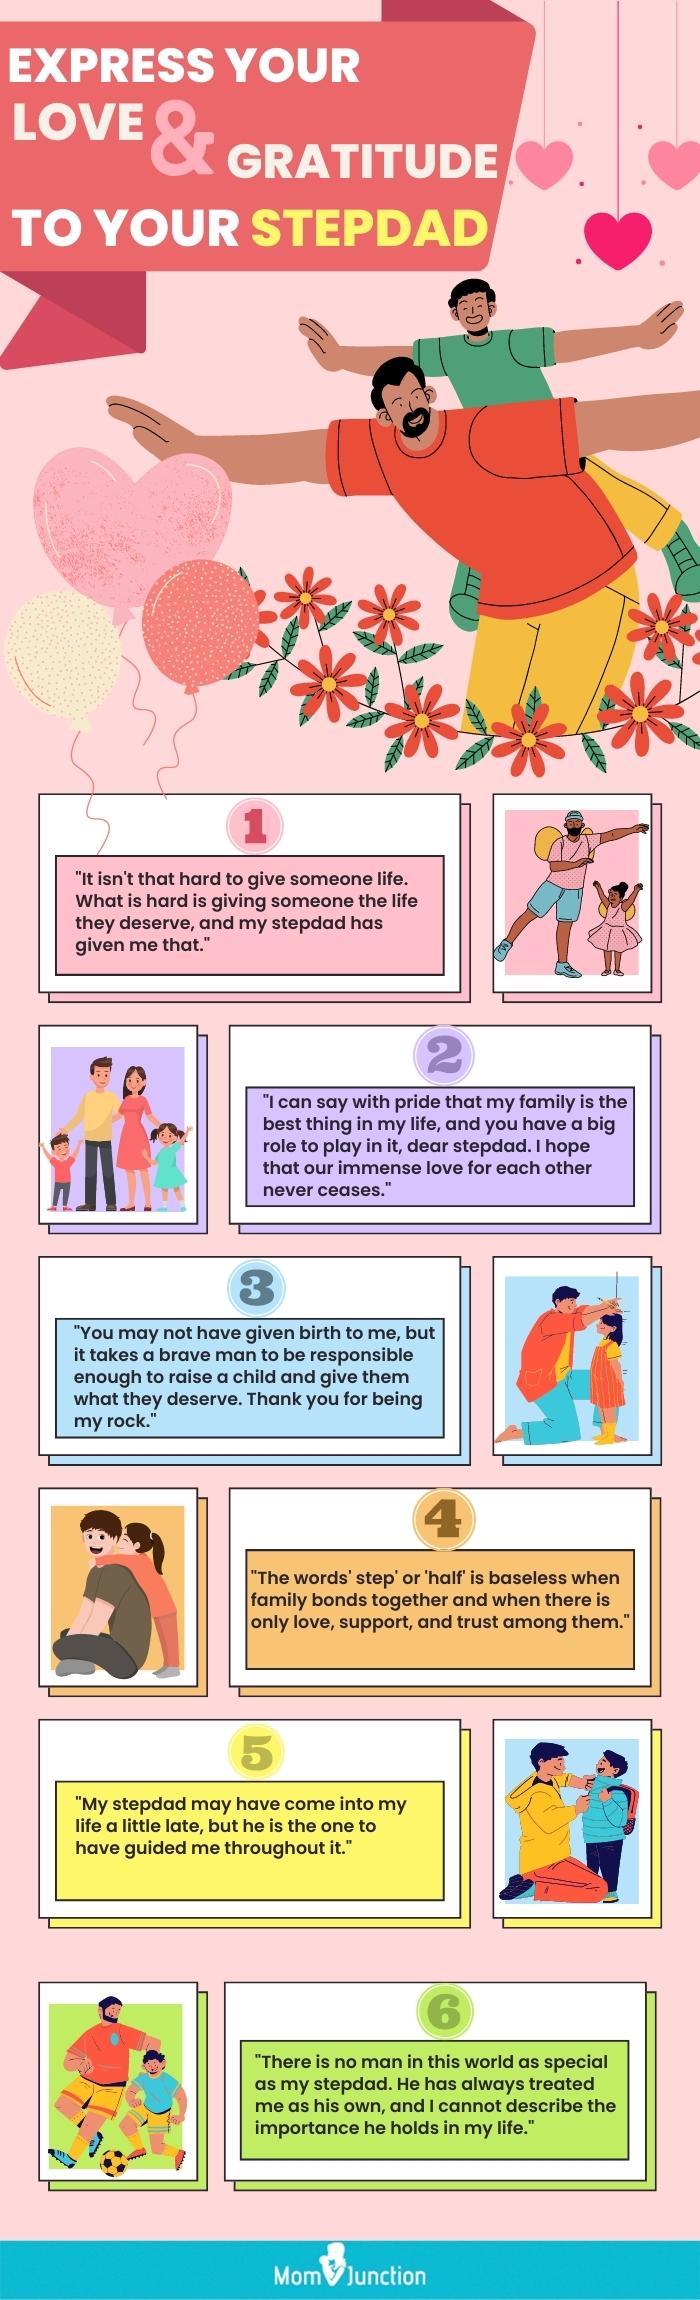 express your love and gratitude to your stepdad (infographic)